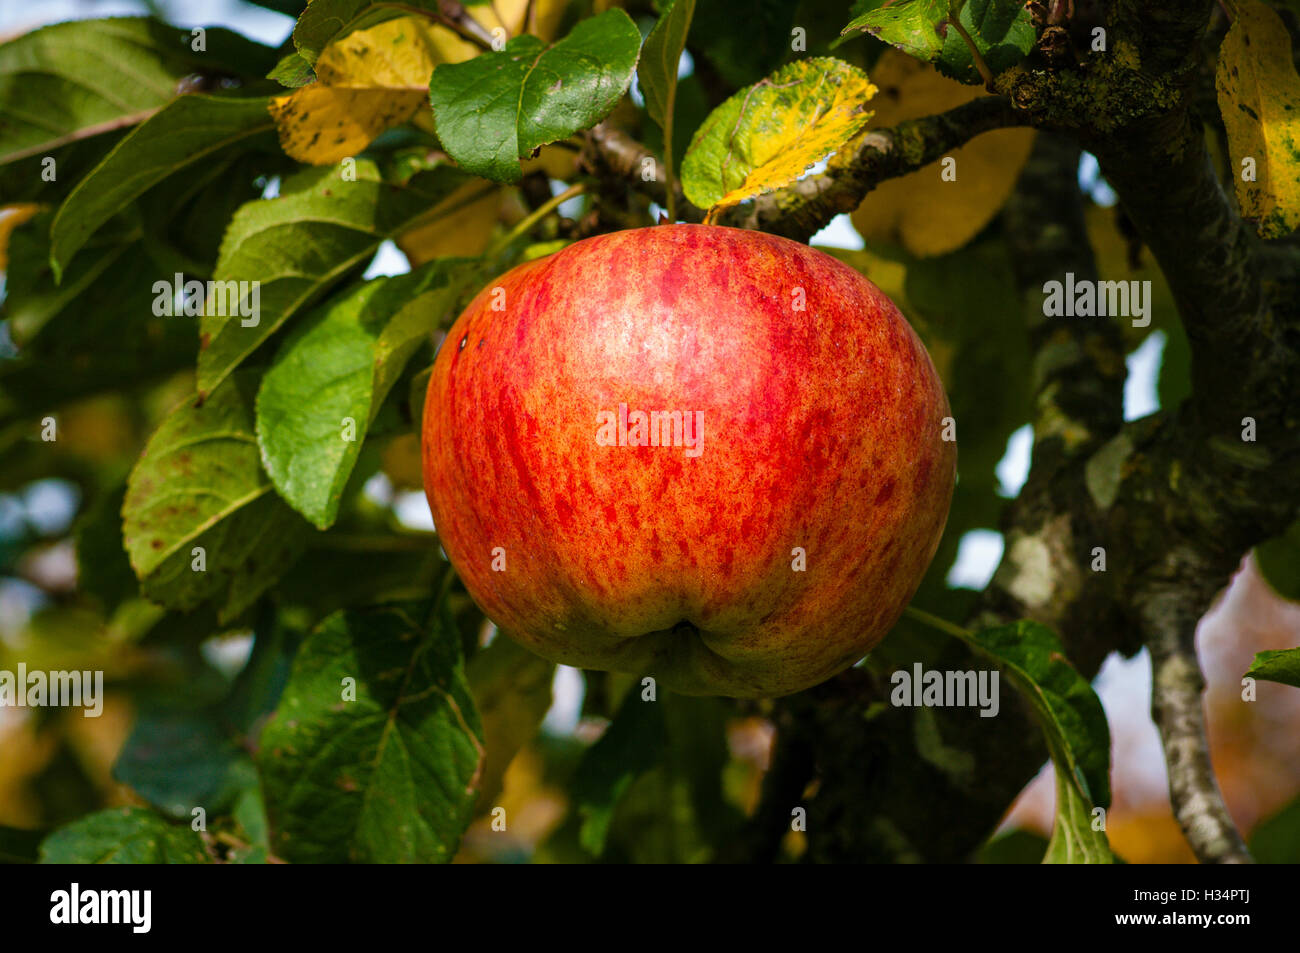 Apple Howgate wonder hanging on tree in autumn prior to harvesting Stock Photo